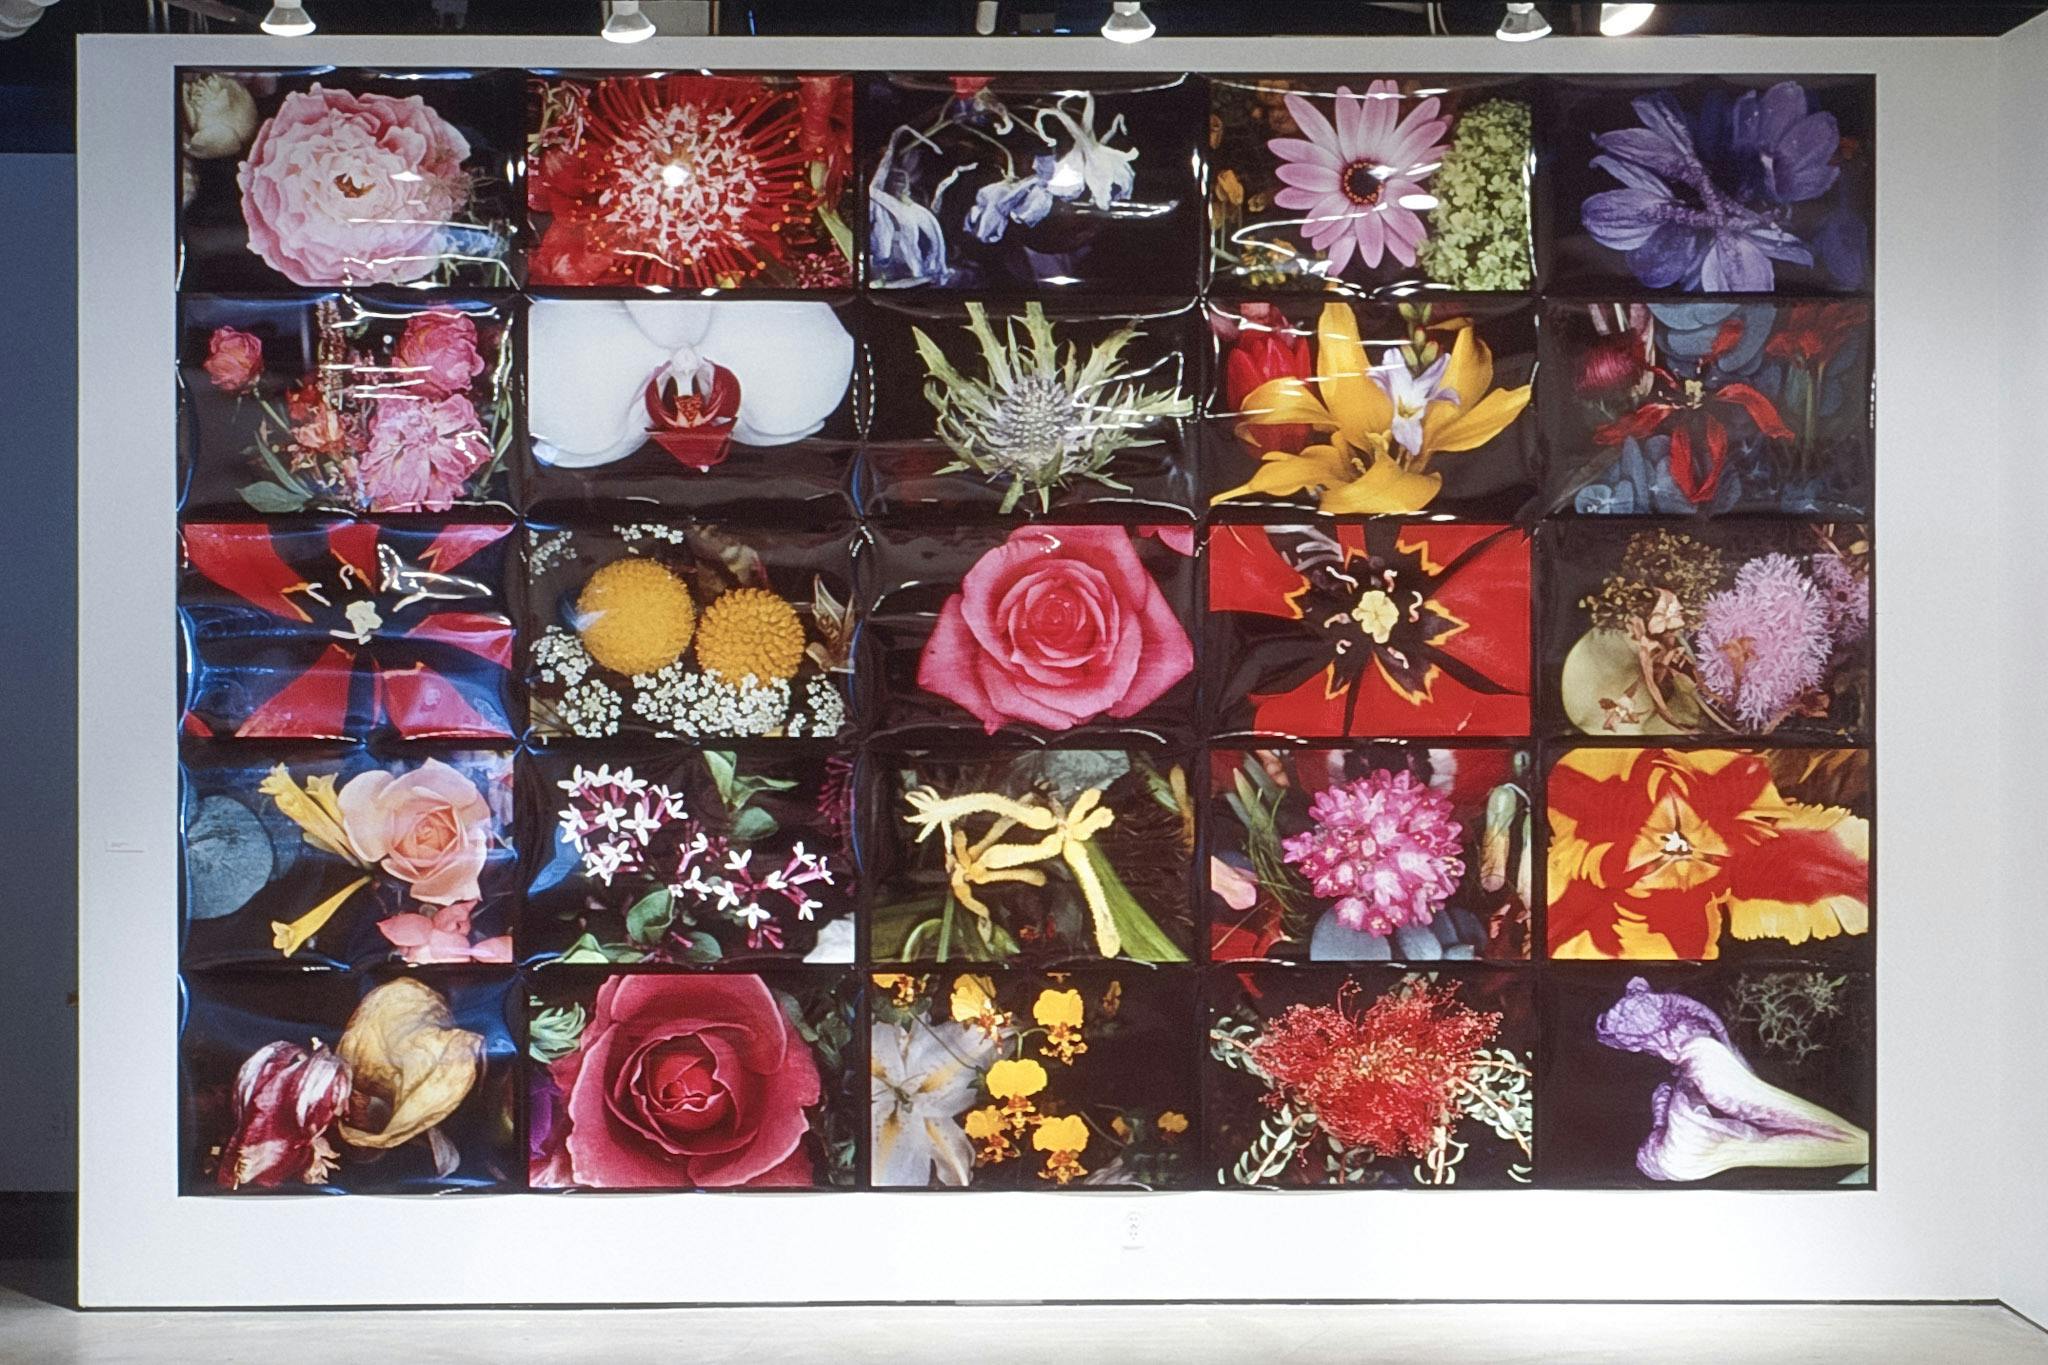 A large scale photo collage is installed on a white gallery wall. The collage is made up of  a 10 x 10 grid of photographs of various flowers and is almost the full height and width of the wall.